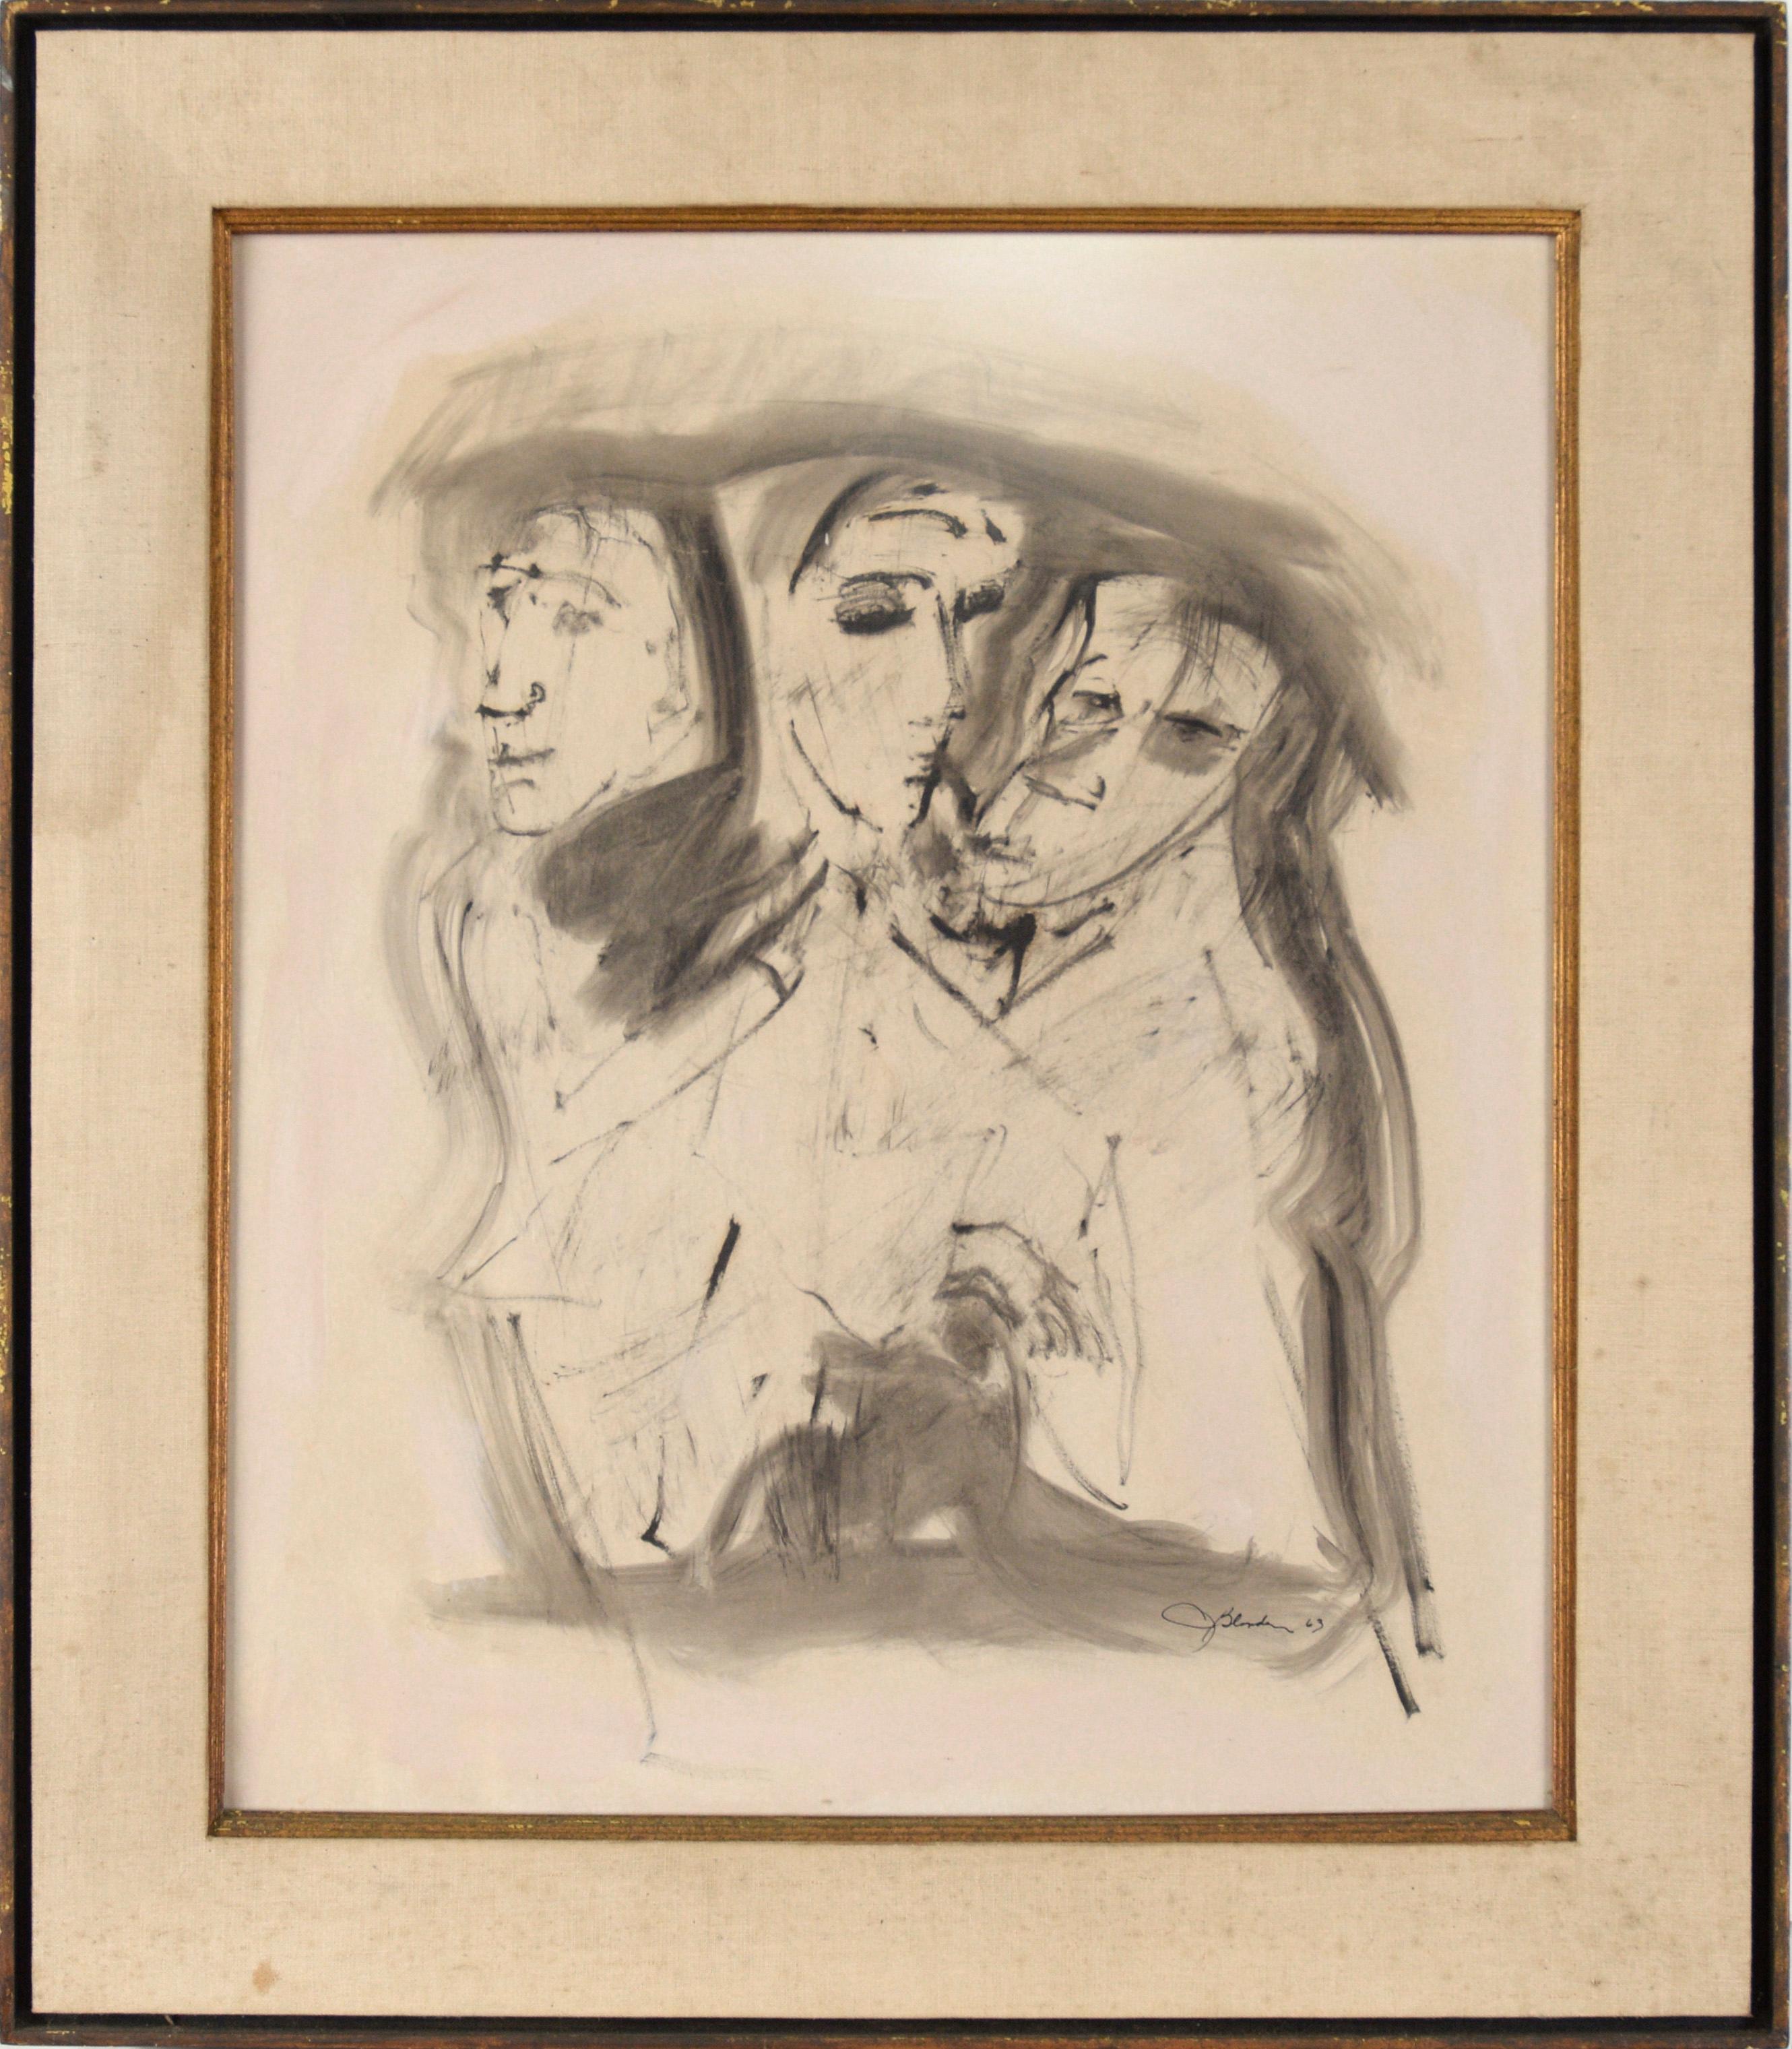 Unknown Figurative Painting - Three Figures - Black and White Illustration in Ink on Paper